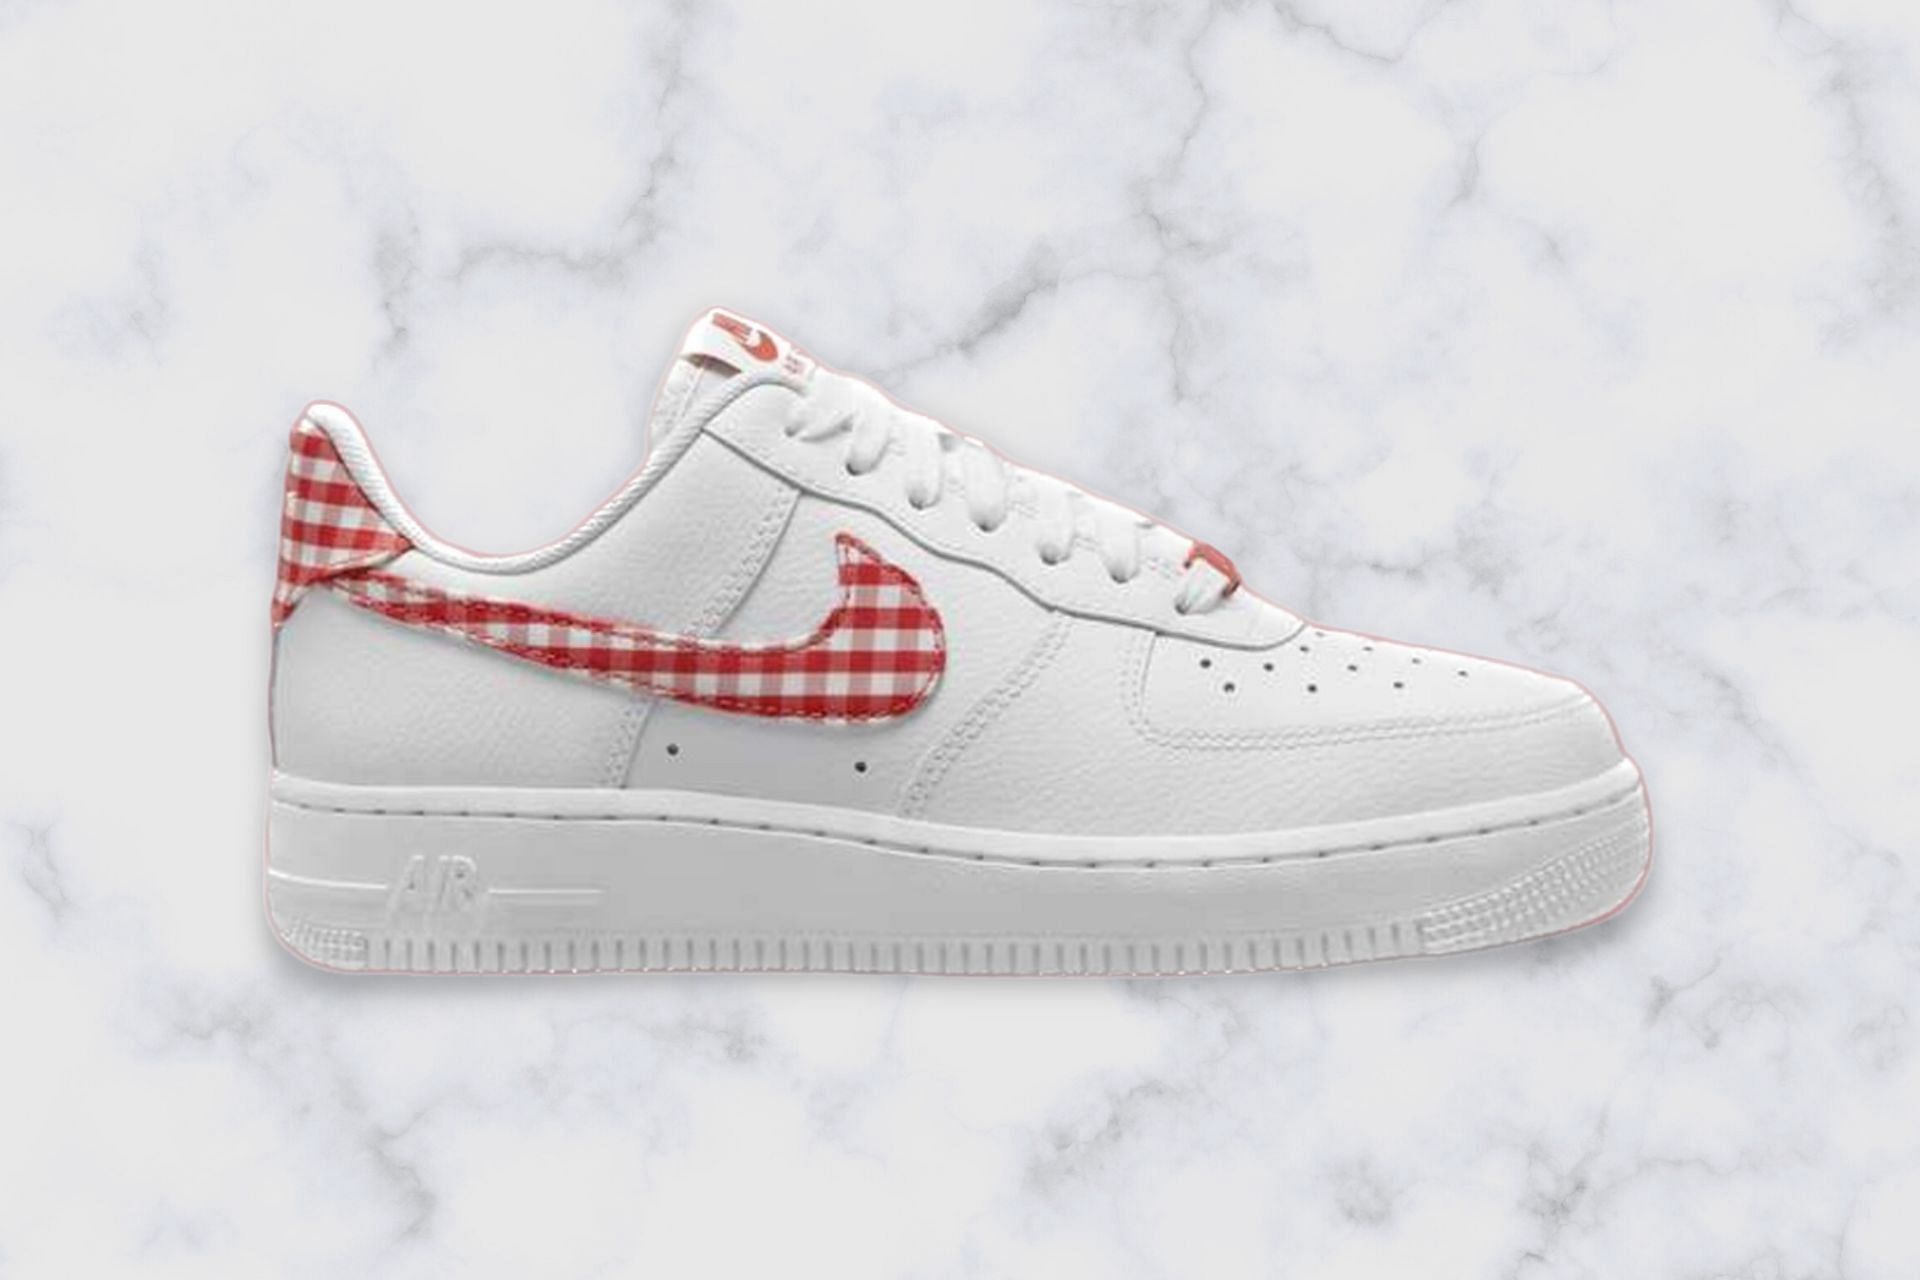 Nike Air Force 1 Low Gingham White Mystic Red shoes (Image via Nike)